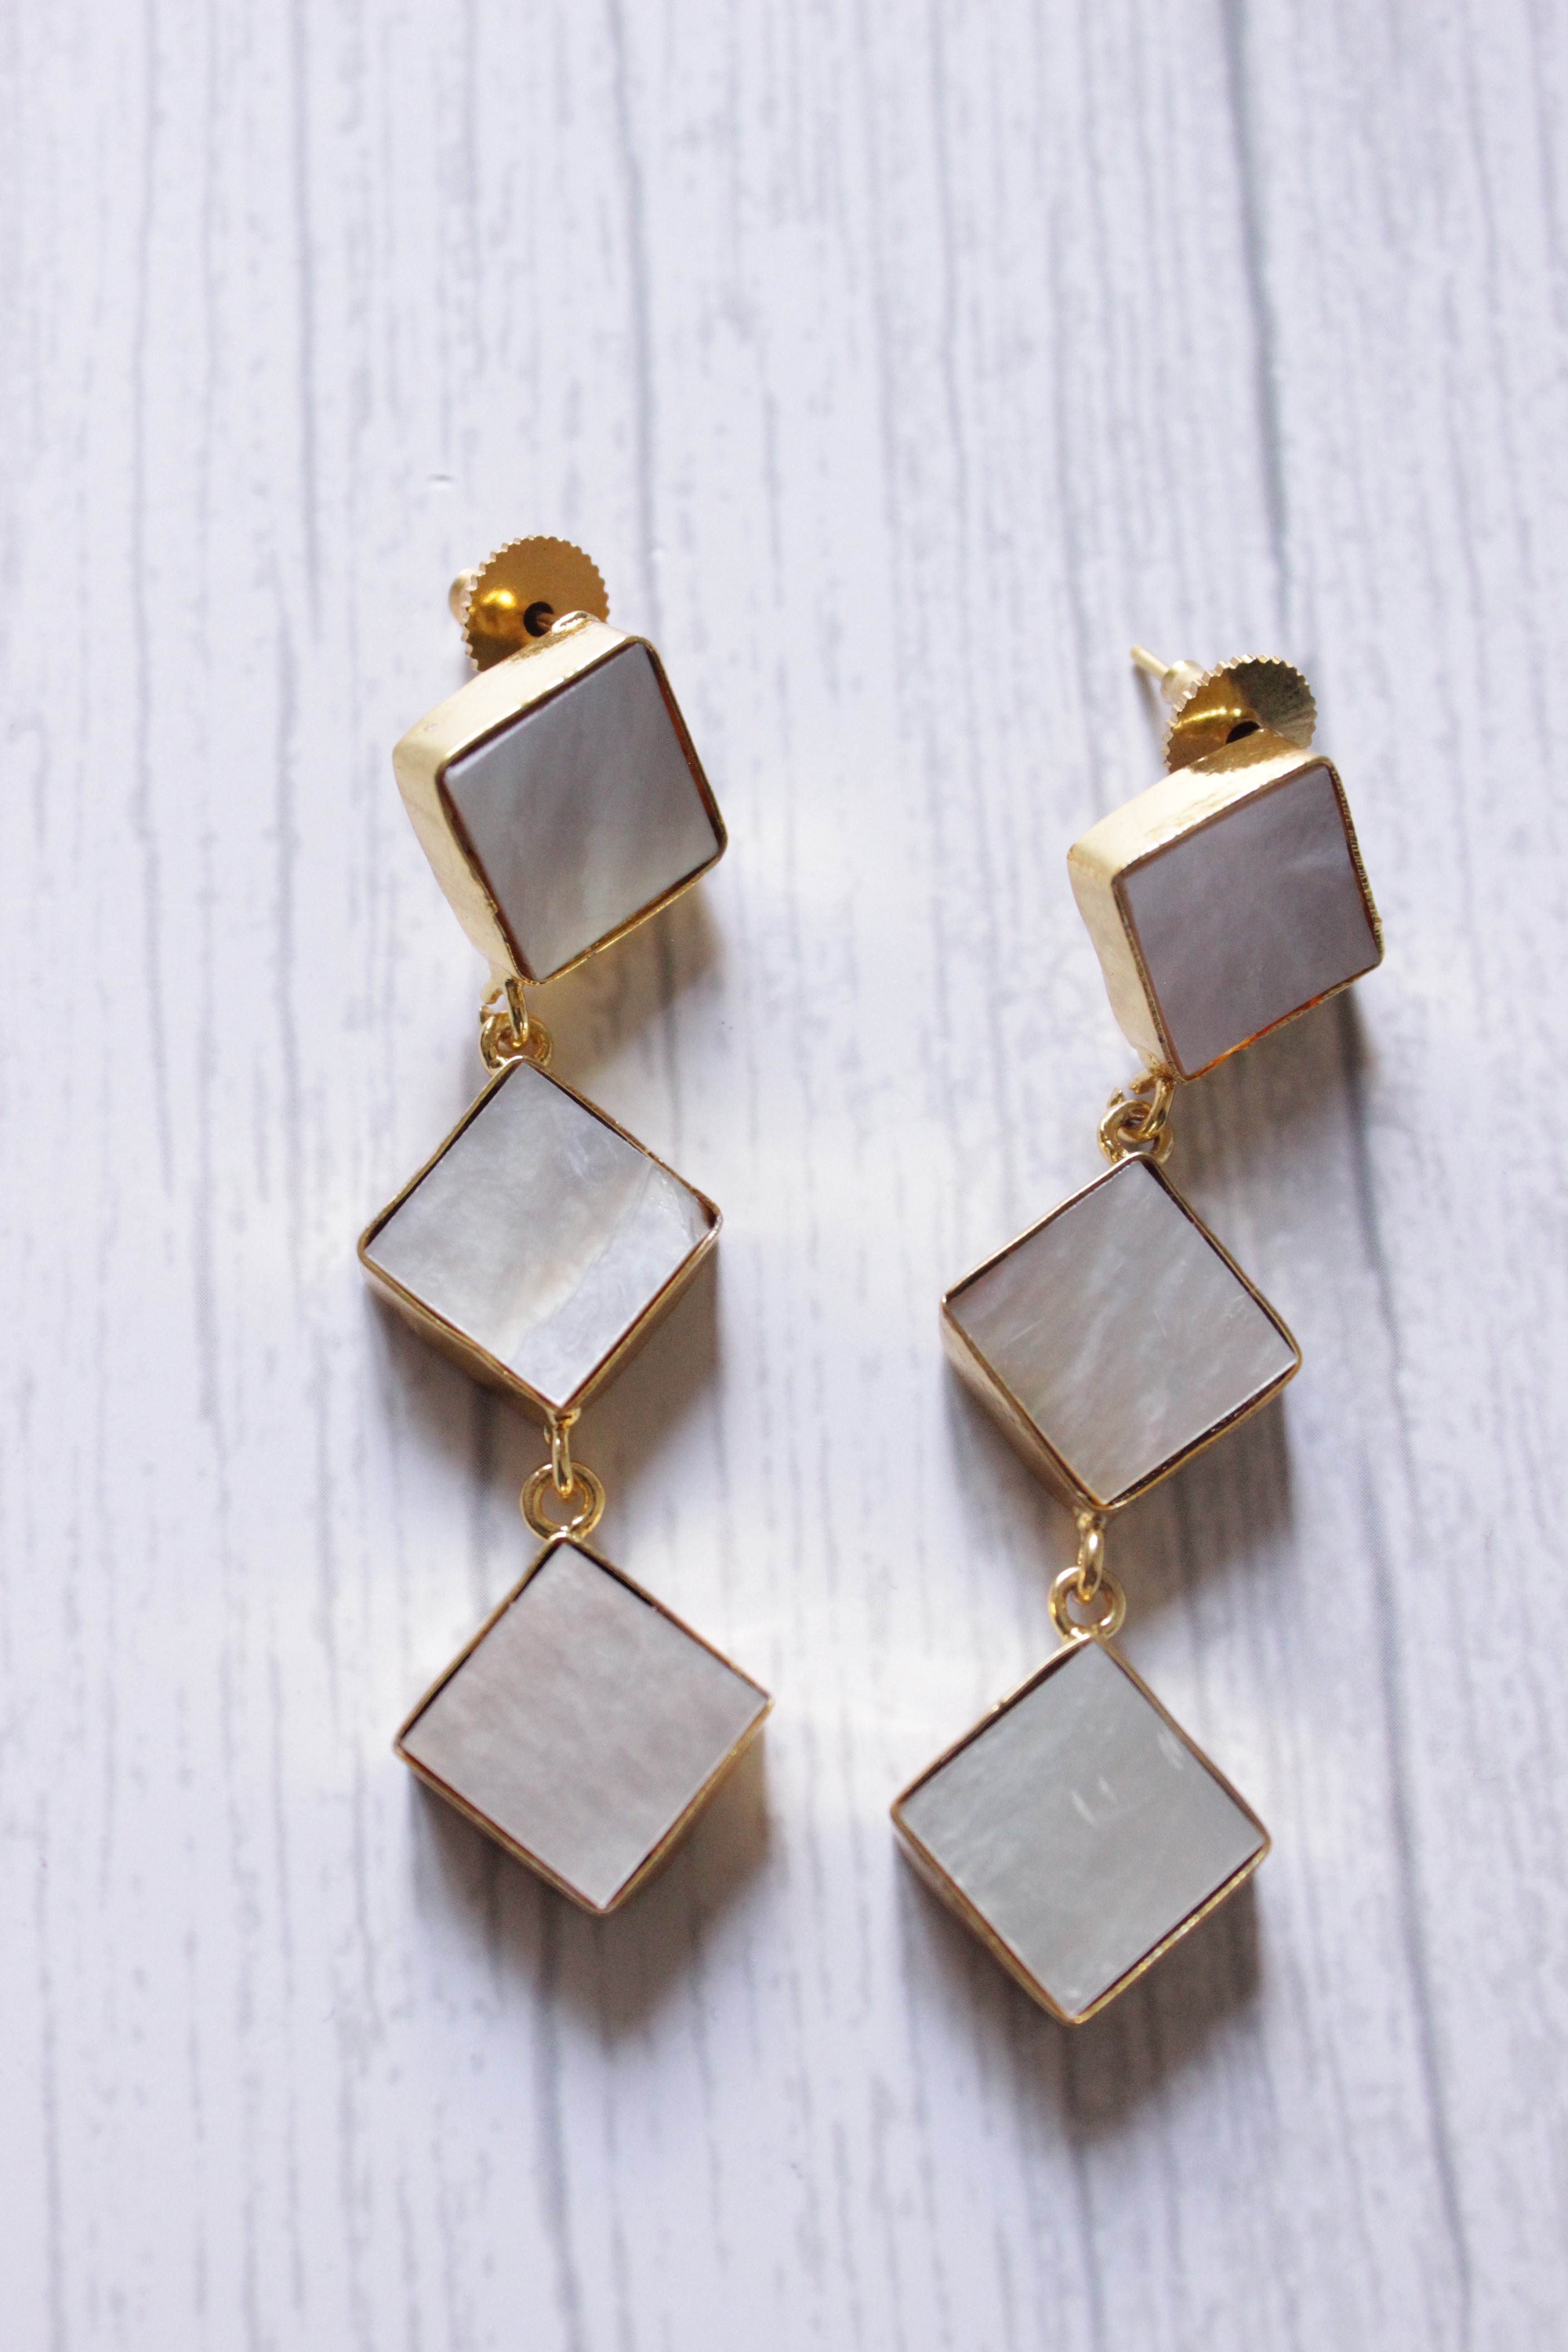 MOP Pearl Gemstone Handmade Gold Plated Jewelry Square Earrings